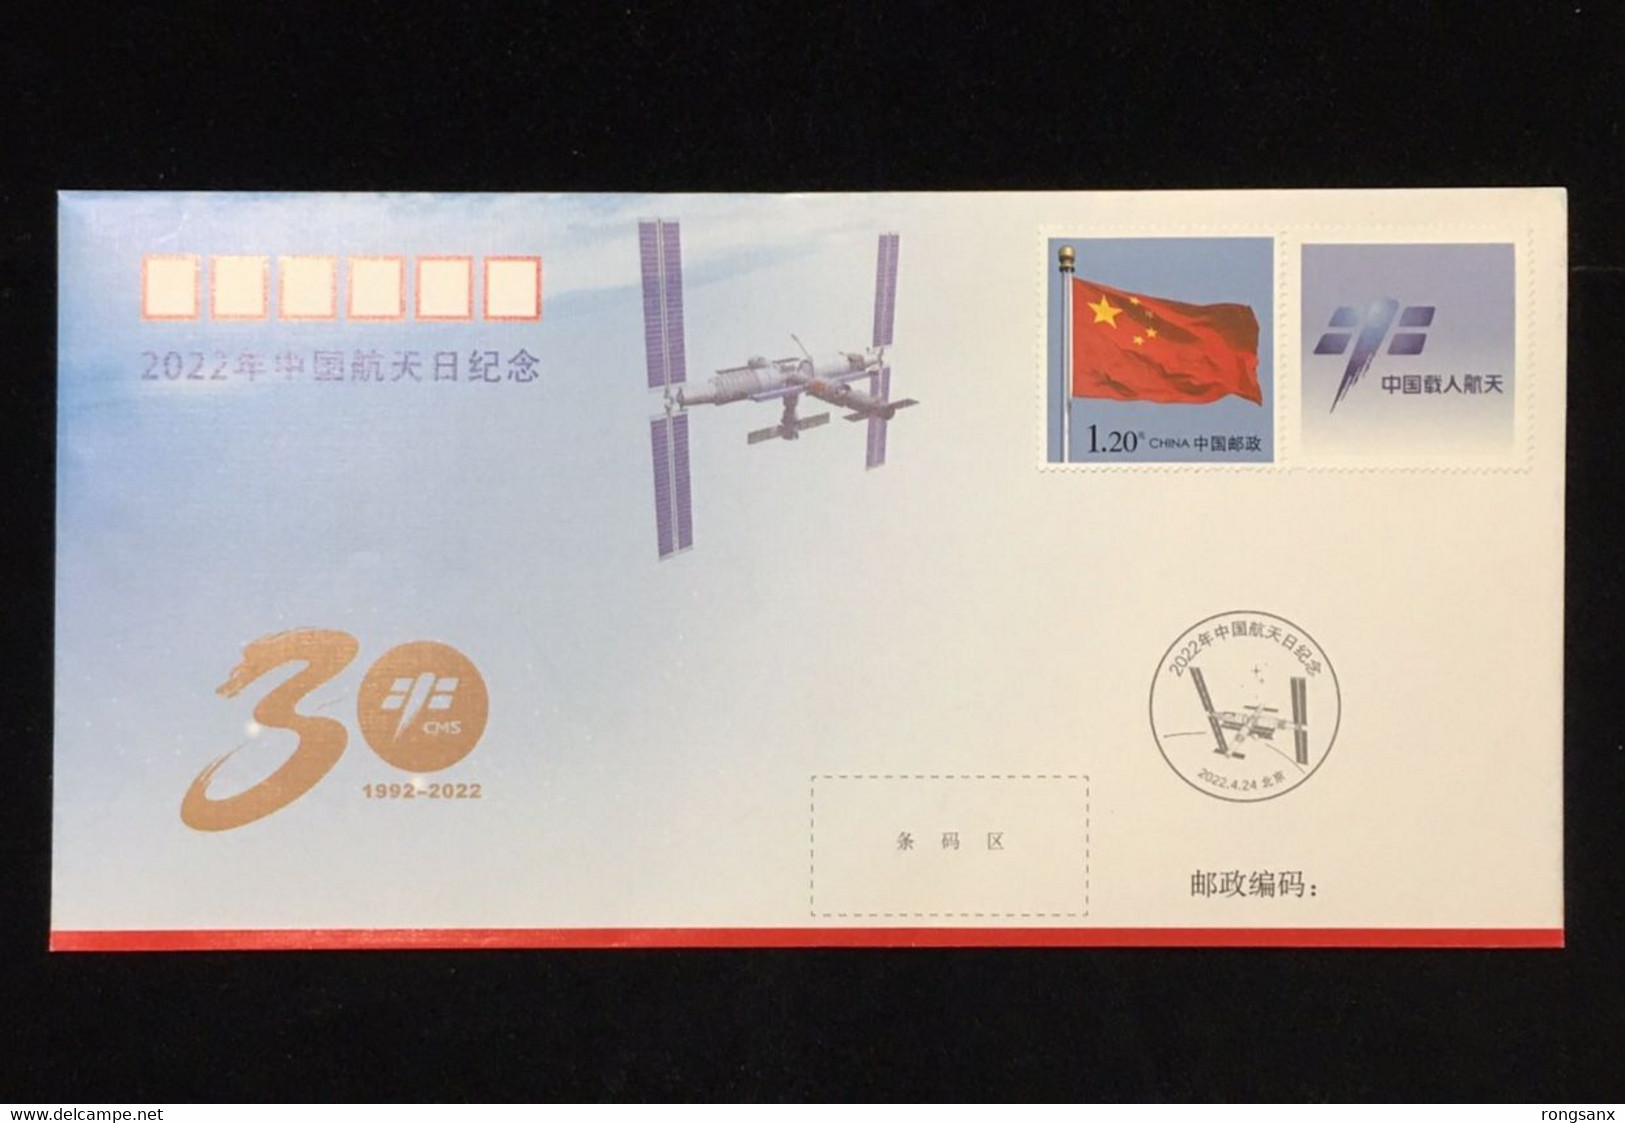 HT-95 CHINA SPACE DAY COMM.COVER 2022 - Asia